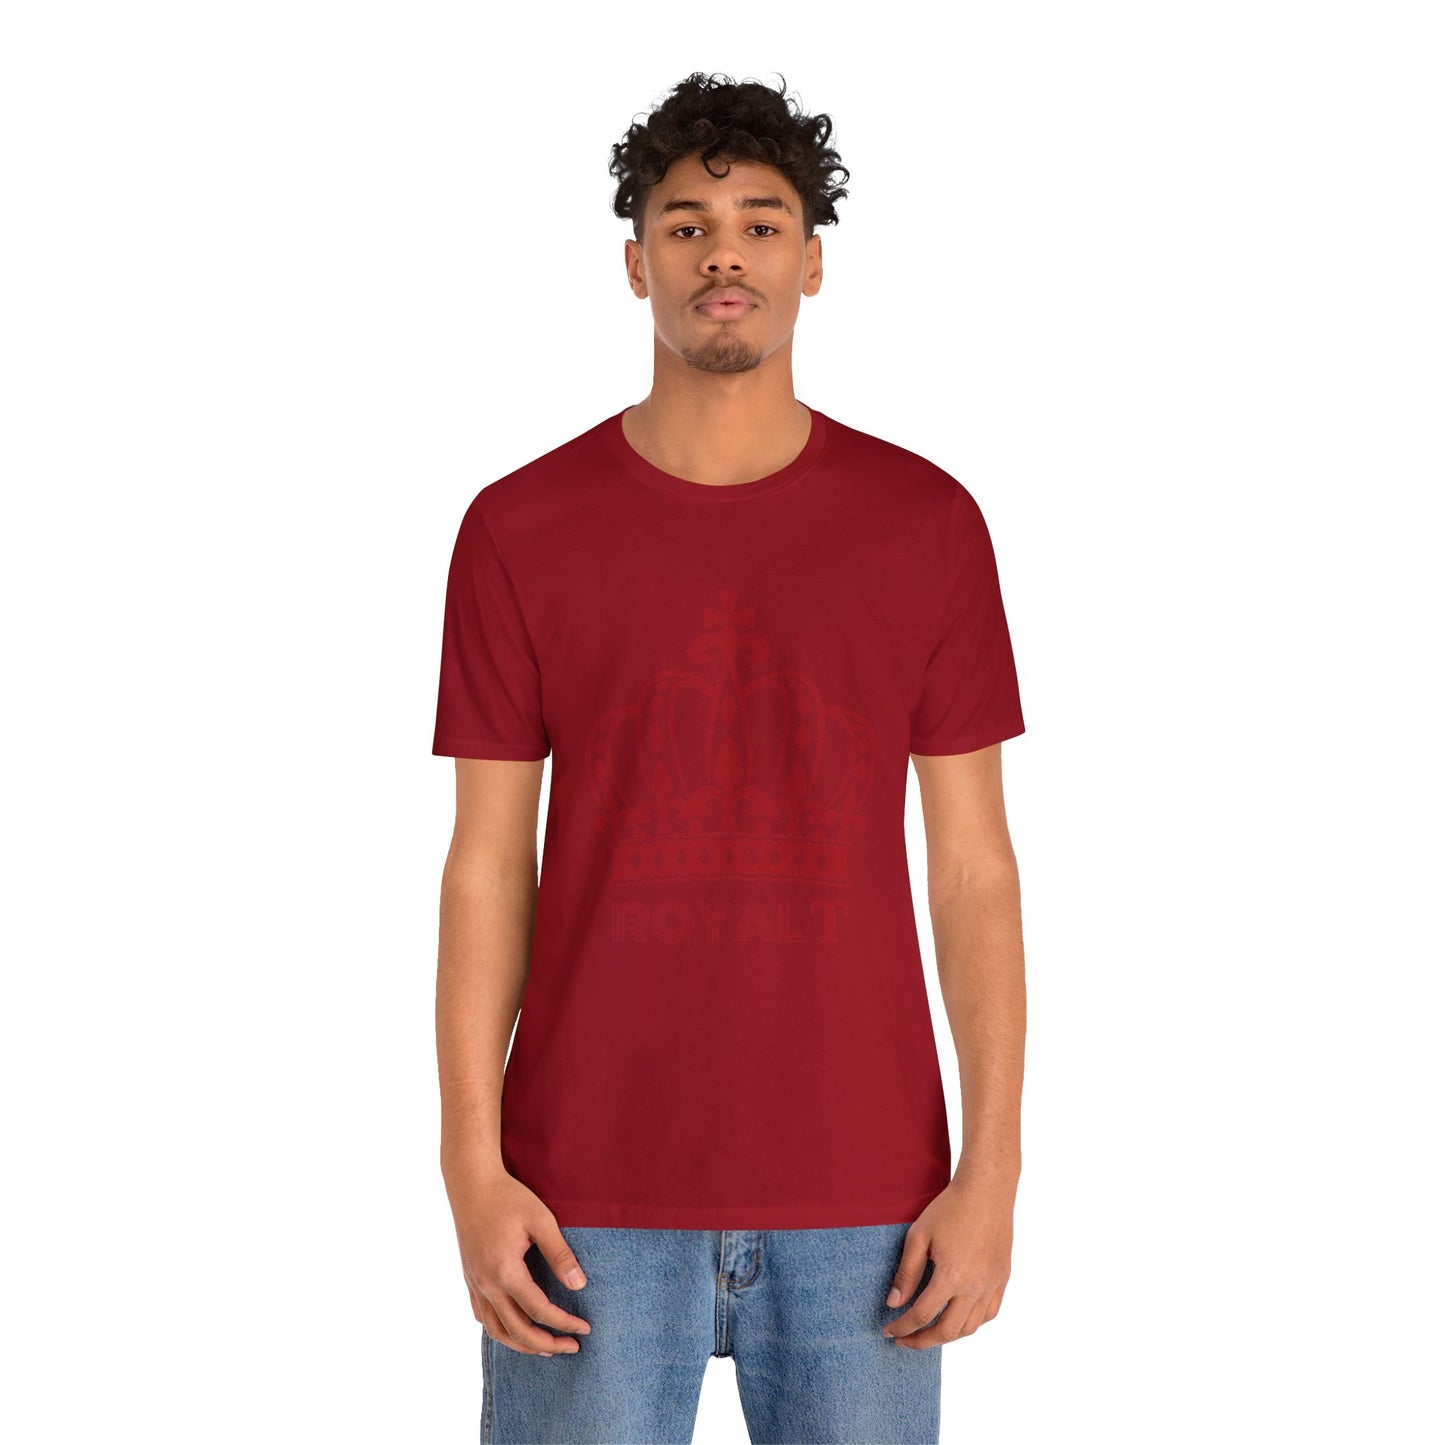 Canvas Red - Unisex Jersey Short Sleeve T Shirt - Red Royal T